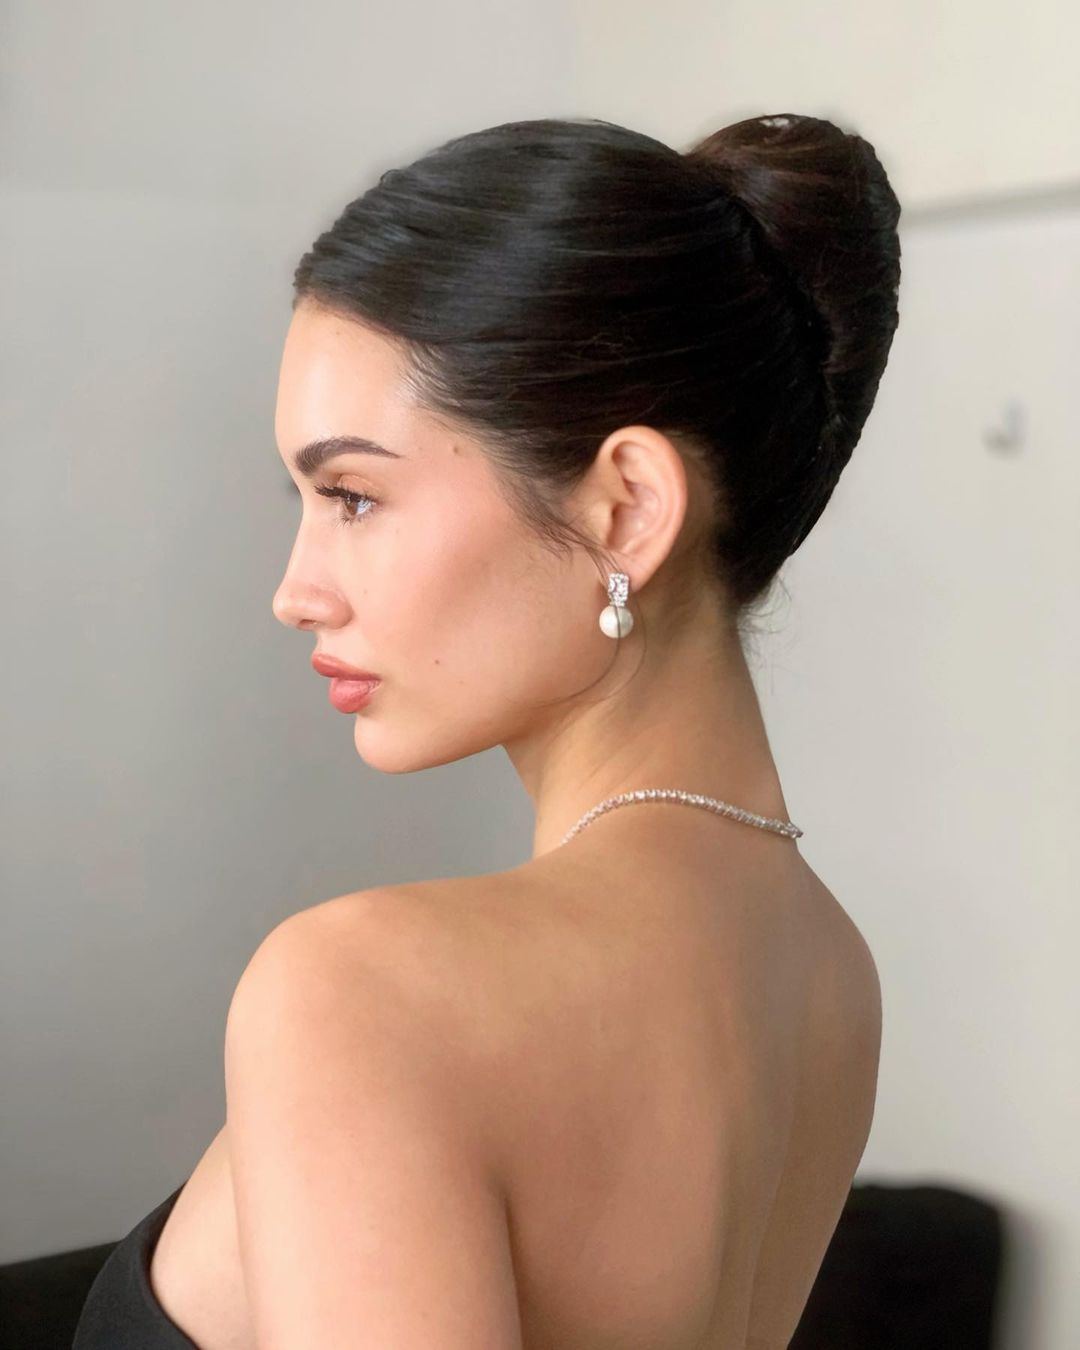 CELEB-INSPIRED SIDE BUN HAIRSTYLES YOU SHOULD TRY